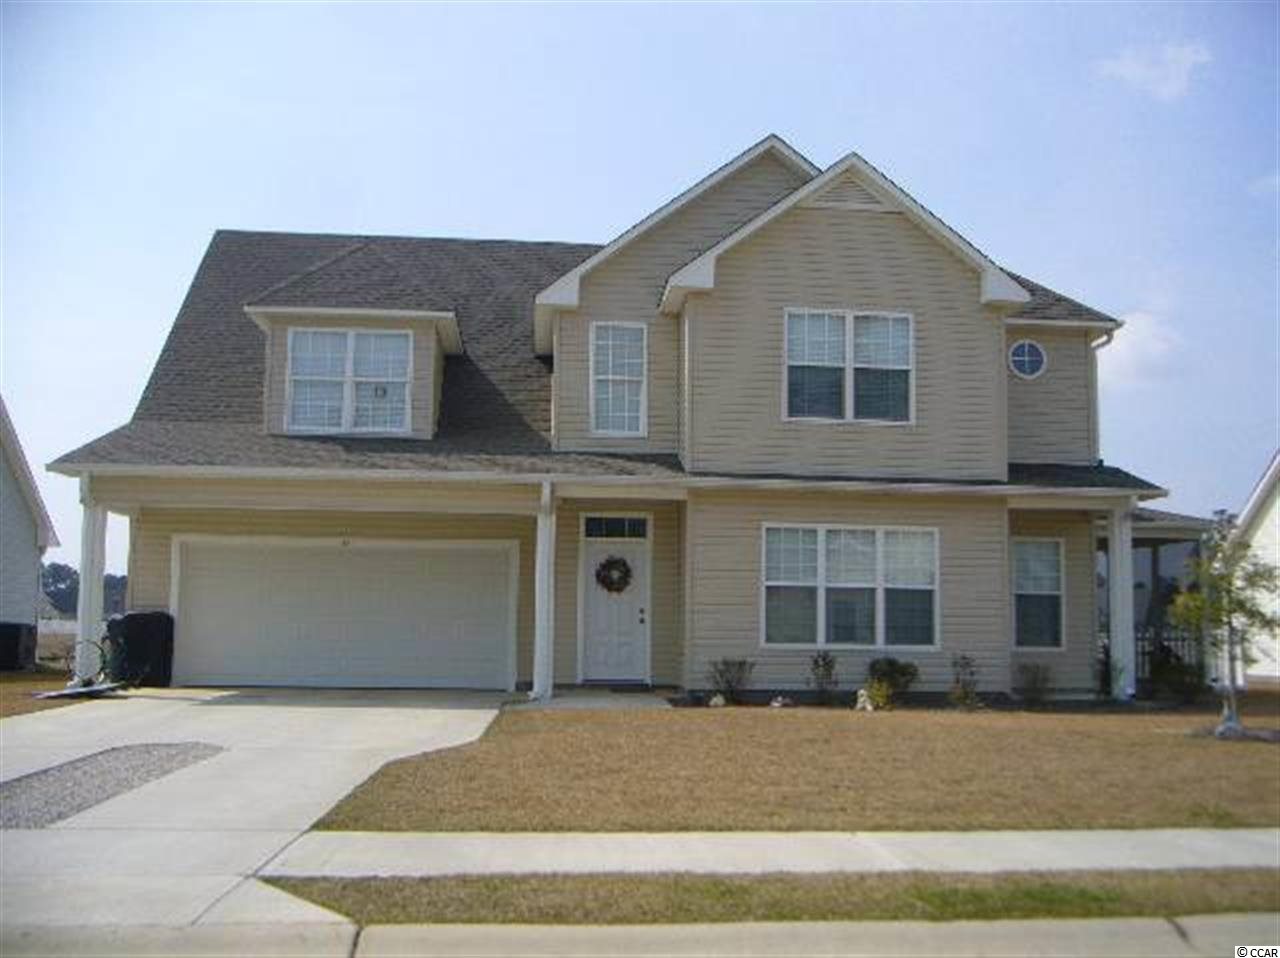 432 Cypress View Ave. Little River, SC 29566